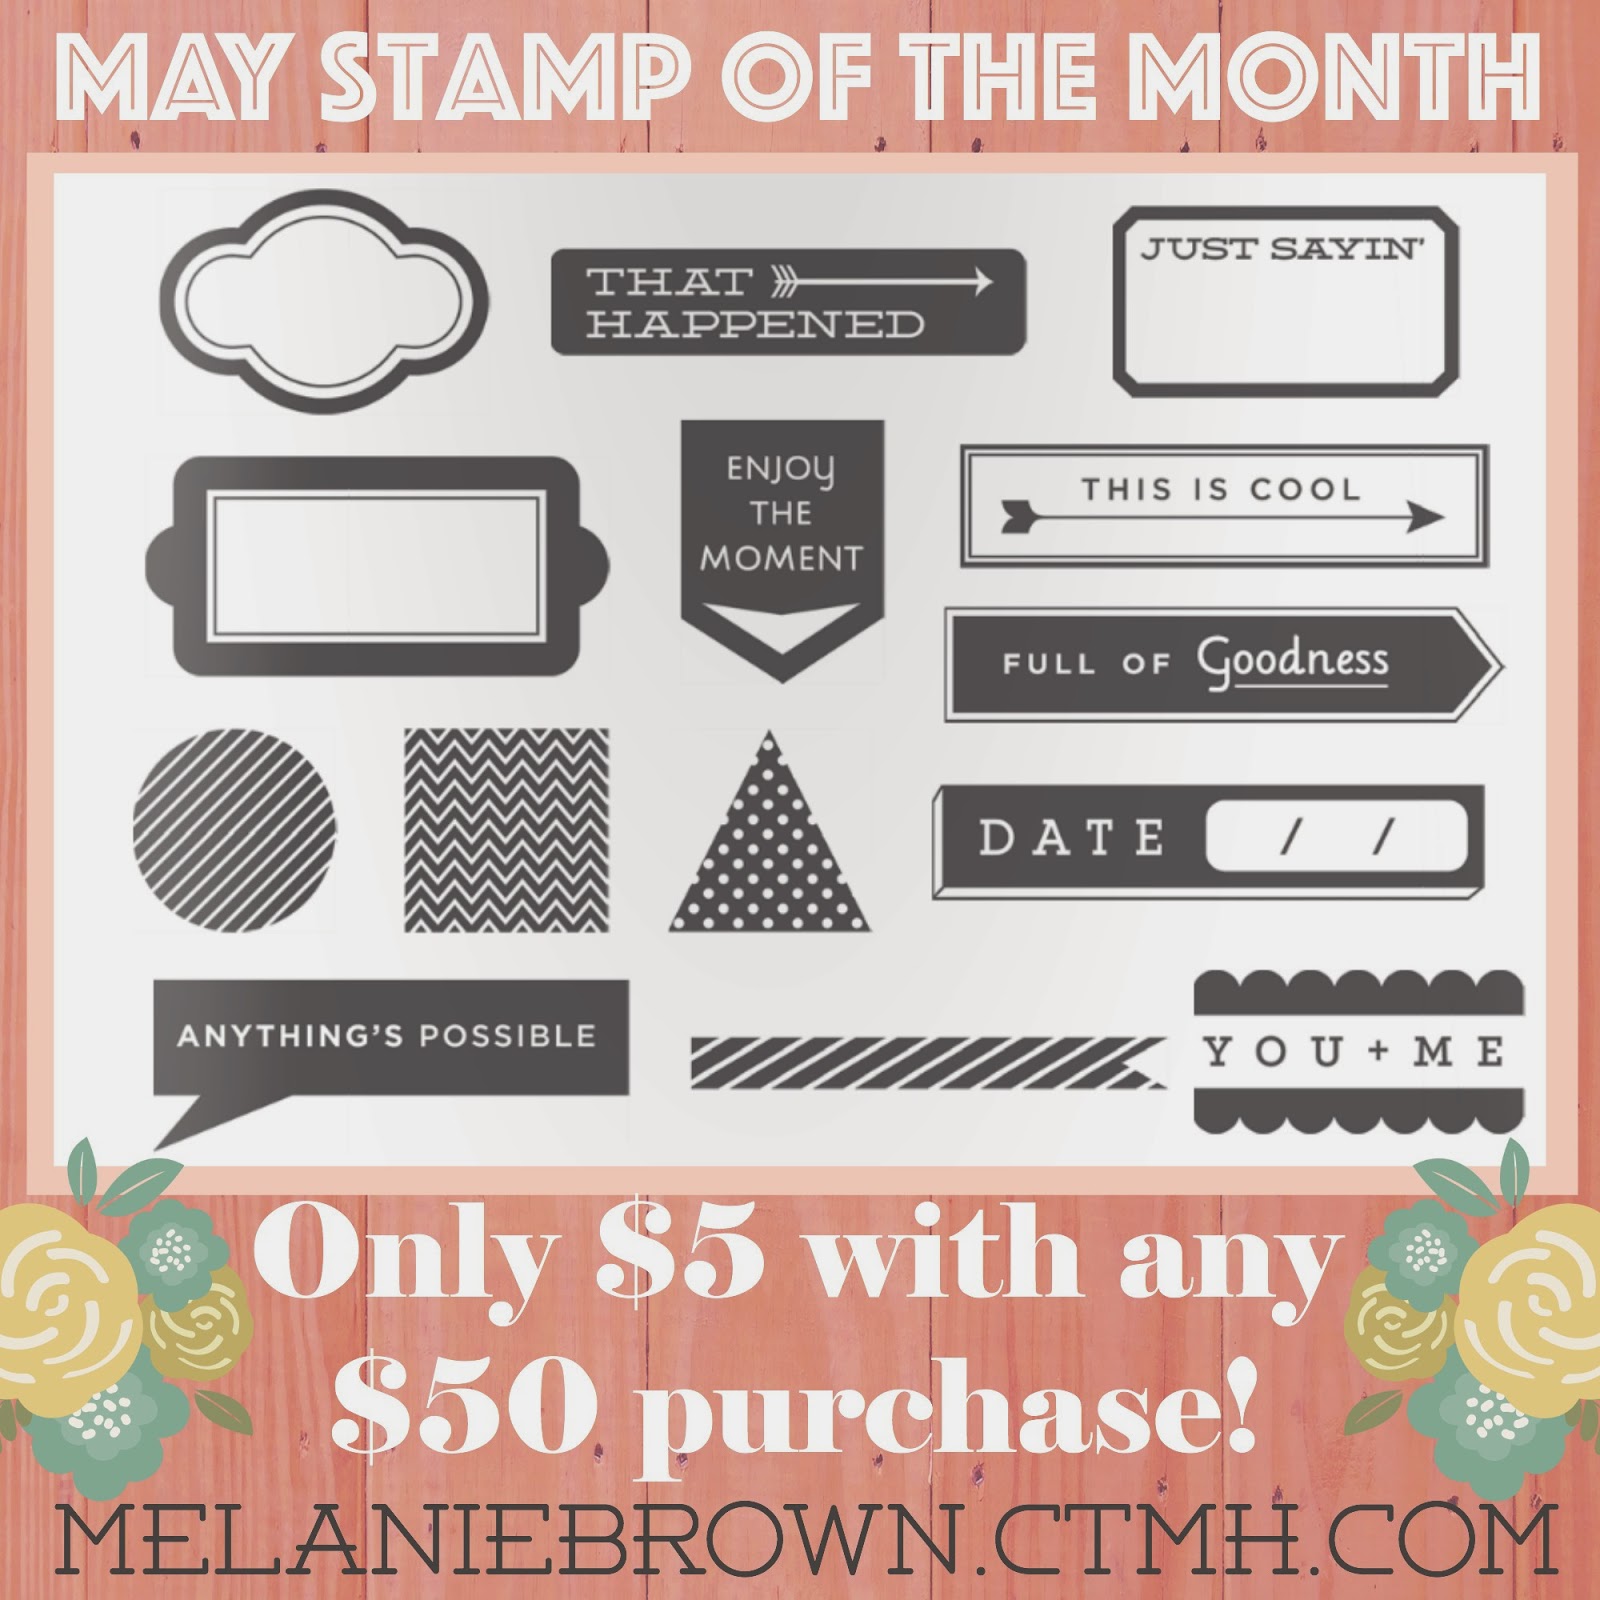 May stamp of the month